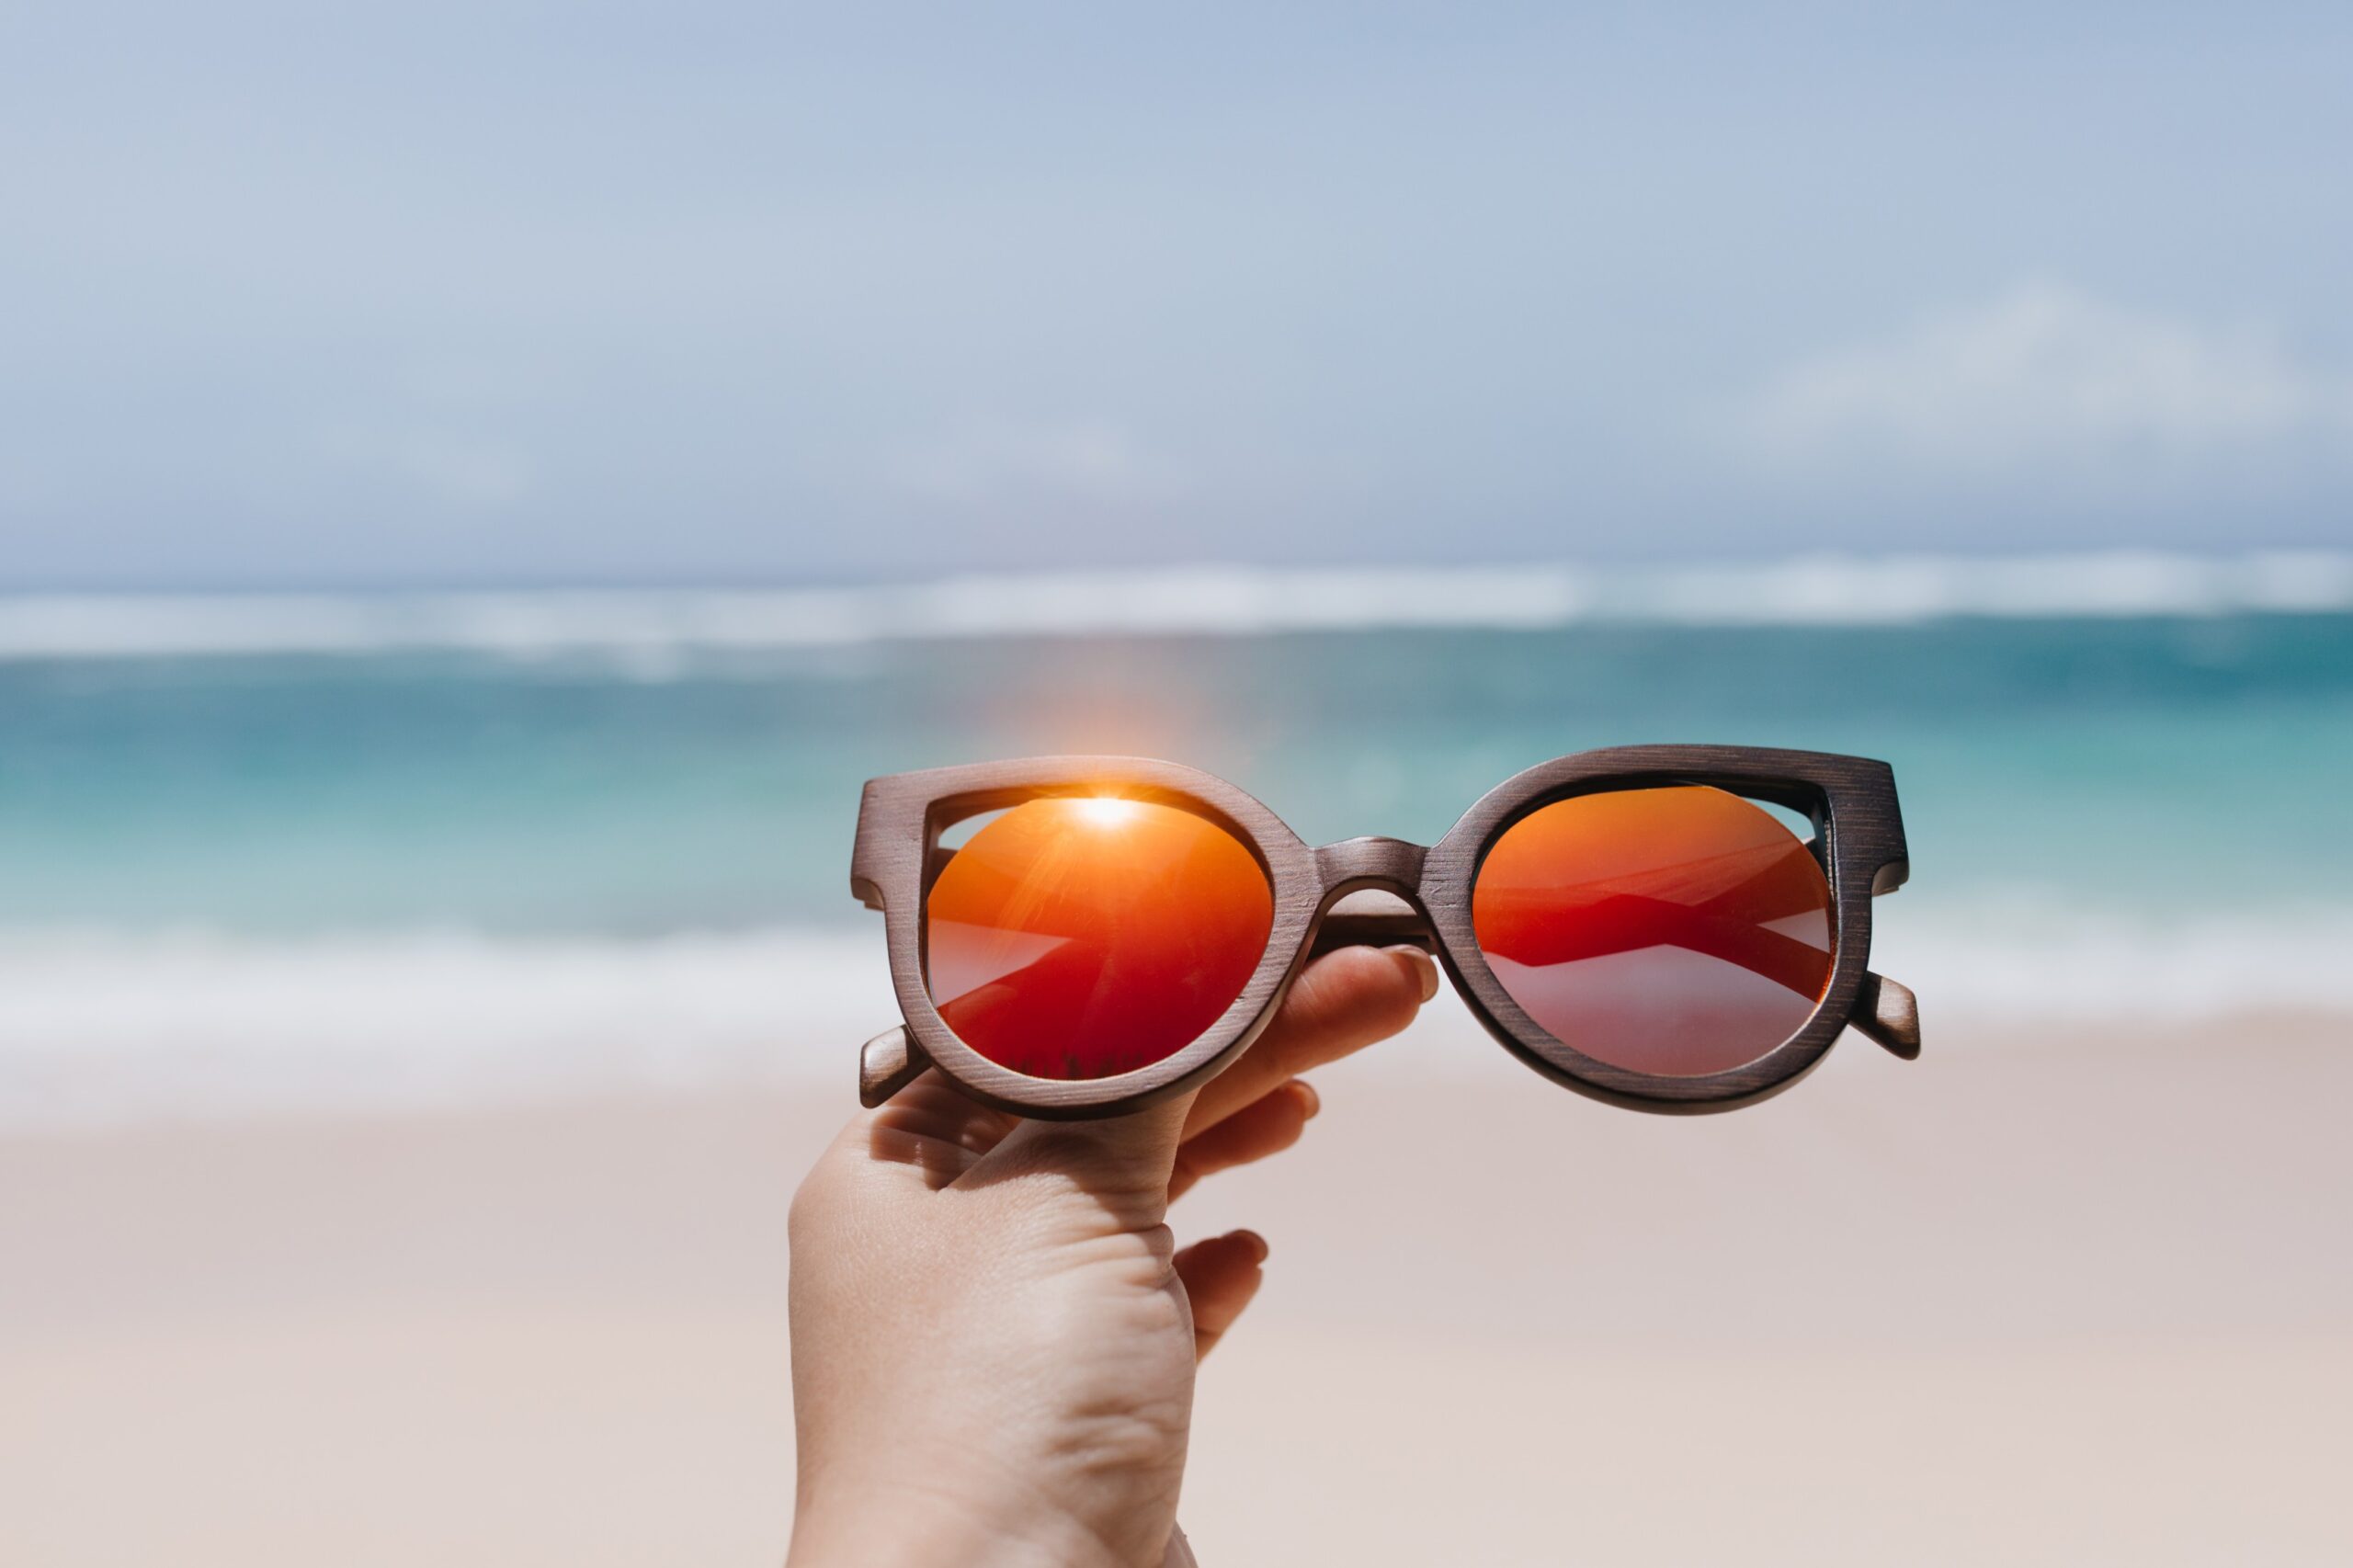 Choosing Protective Sunglasses for Sports & Outdoor Activities: Top Tips